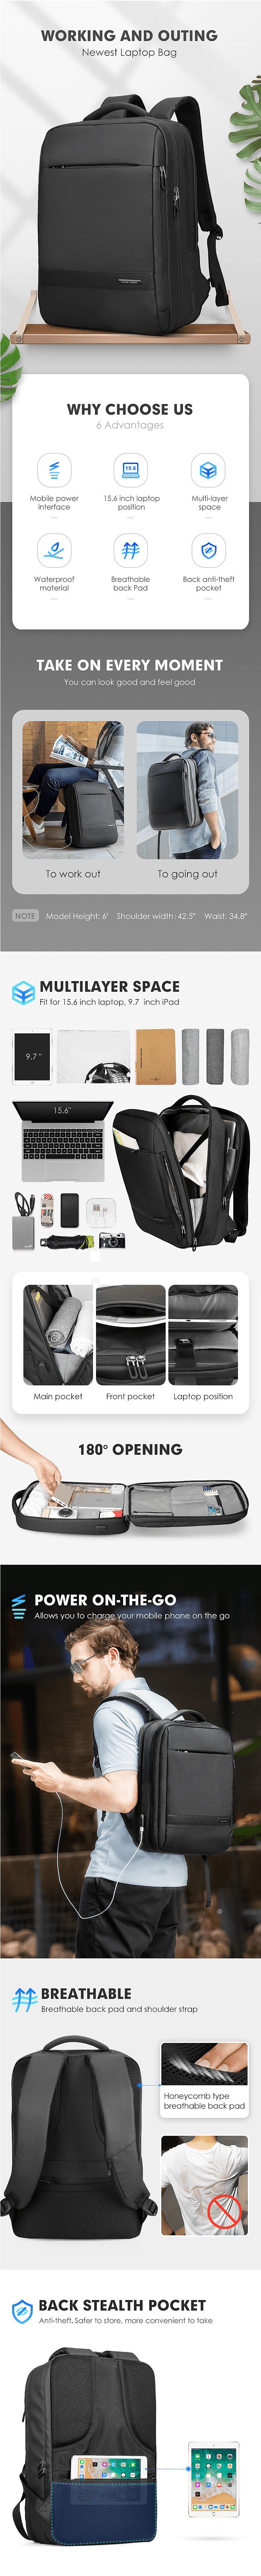 Mark-Ryden-Anti-thief-USB-Backpack-156-inch-Laptop-Bag-for-Men-Multi-layer-School-Bag-Male-Travel-1544417